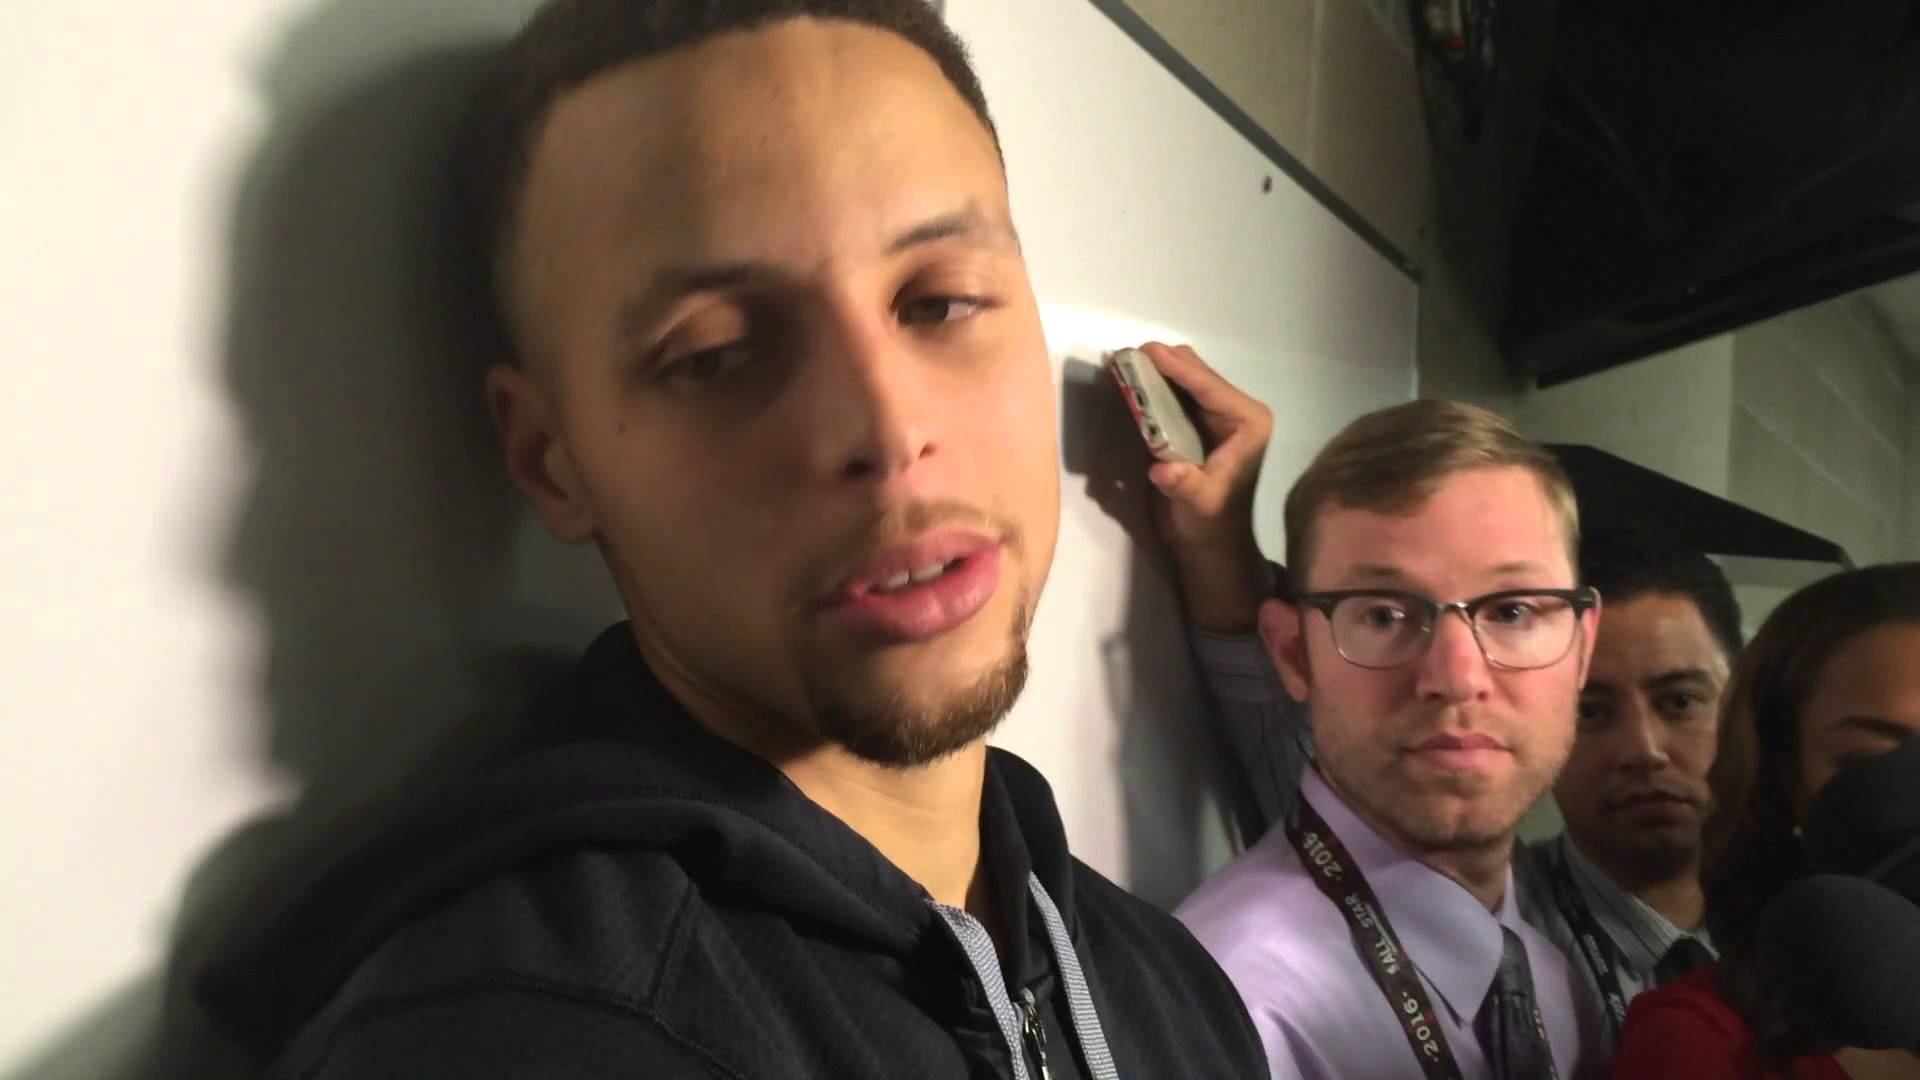 Steph Curry addresses autograph incident of fans falling